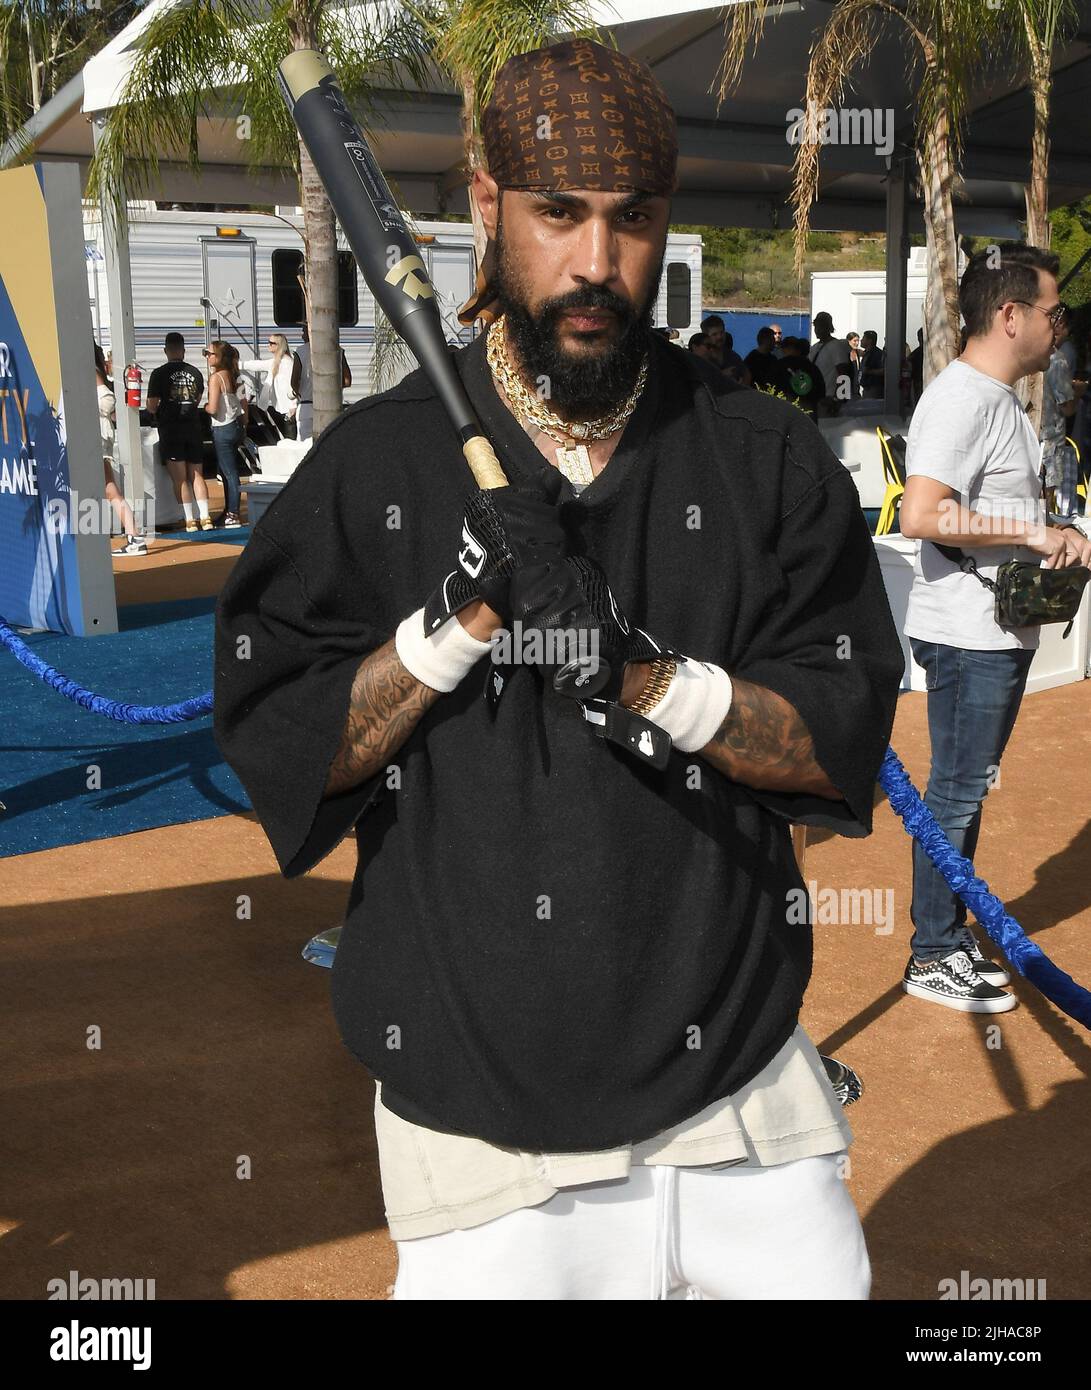 Los Angeles, USA. 16th July, 2022. Jerry Lorenzo at the 2022 MLB All-Star  Celebrity Softball Game Media Availability held at the 76 Station - Dodger  Stadium Parking Lot in Los Angeles, CA